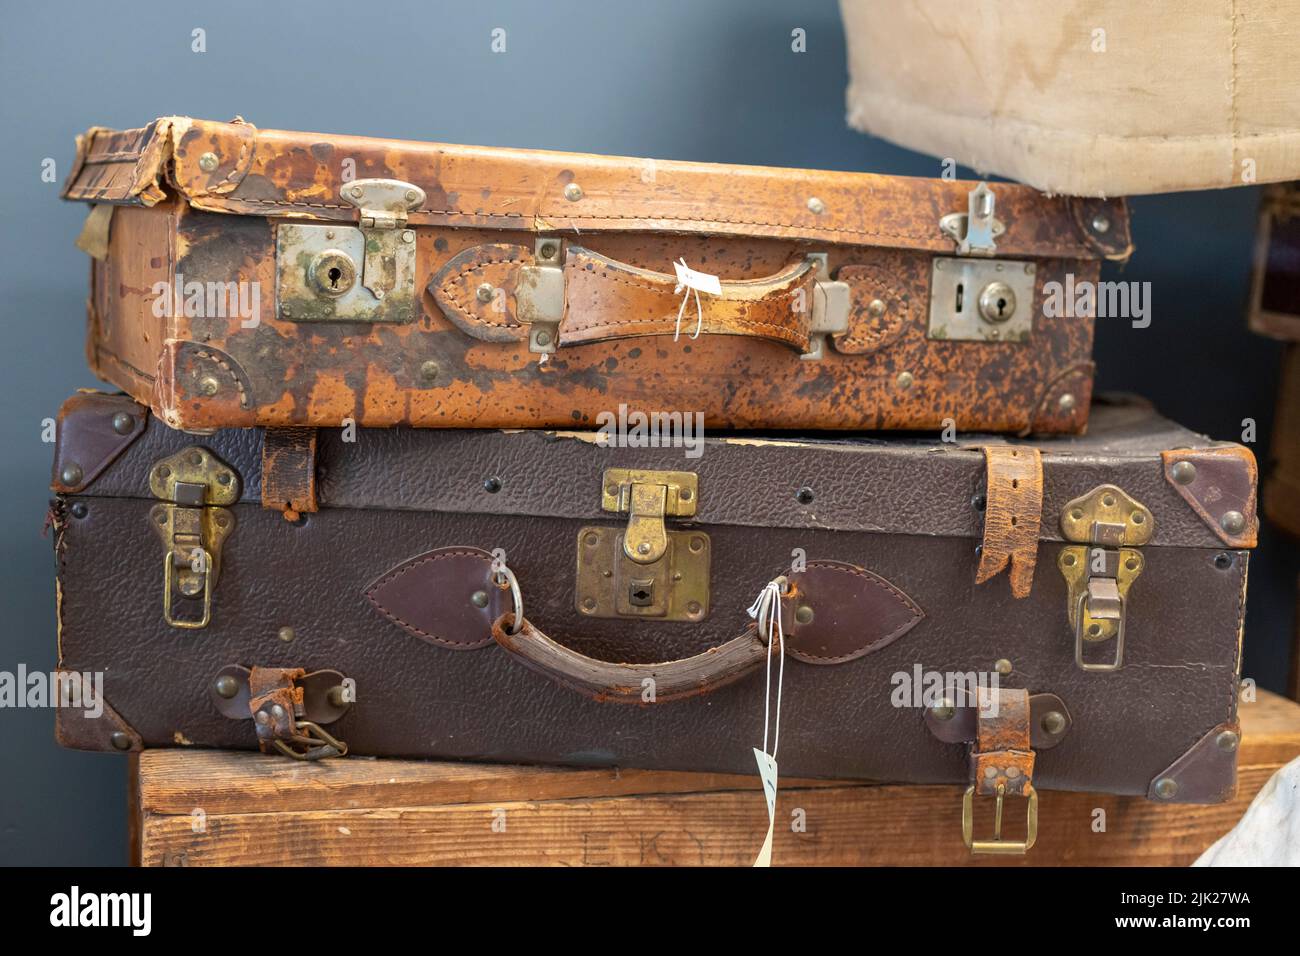 Granada, Colorado - The Amache Museum near the World War 2 Amache Japanese internment camp displays suitcases that internees brought with them when ev Stock Photo